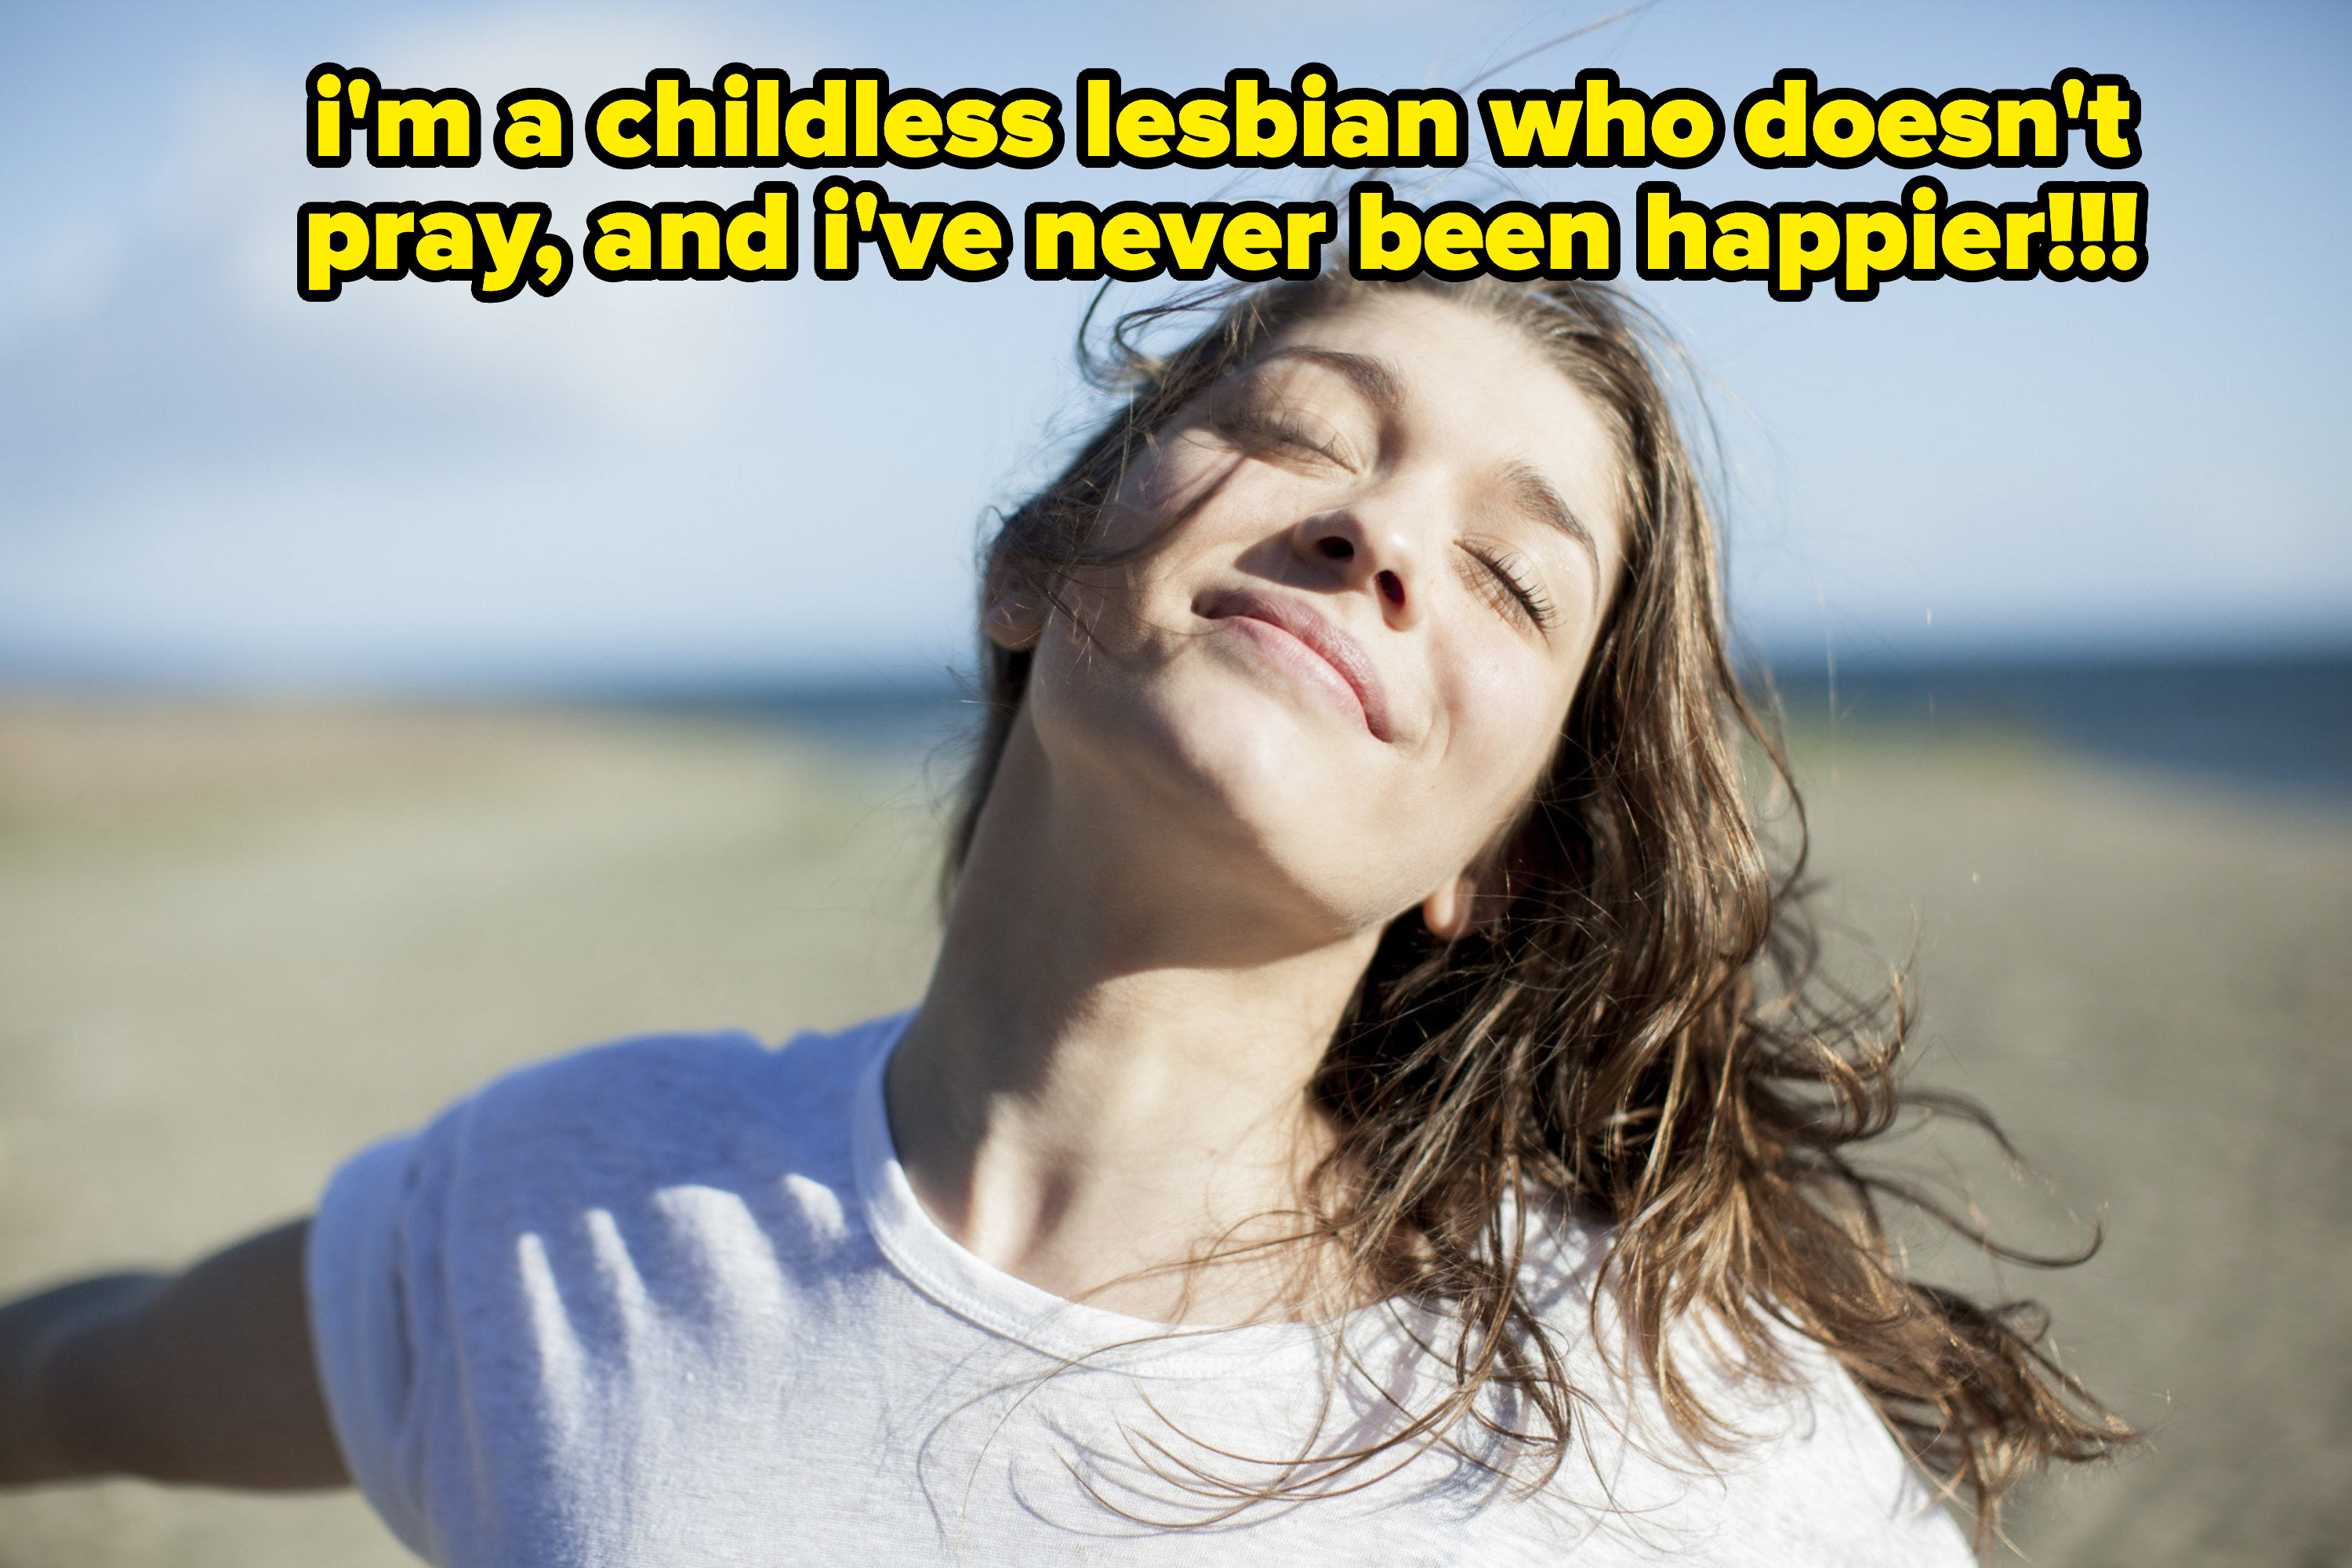 &quot;i&#x27;m a childless lesbian who doesn&#x27;t pray, and i&#x27;ve never been happier!!!&quot;